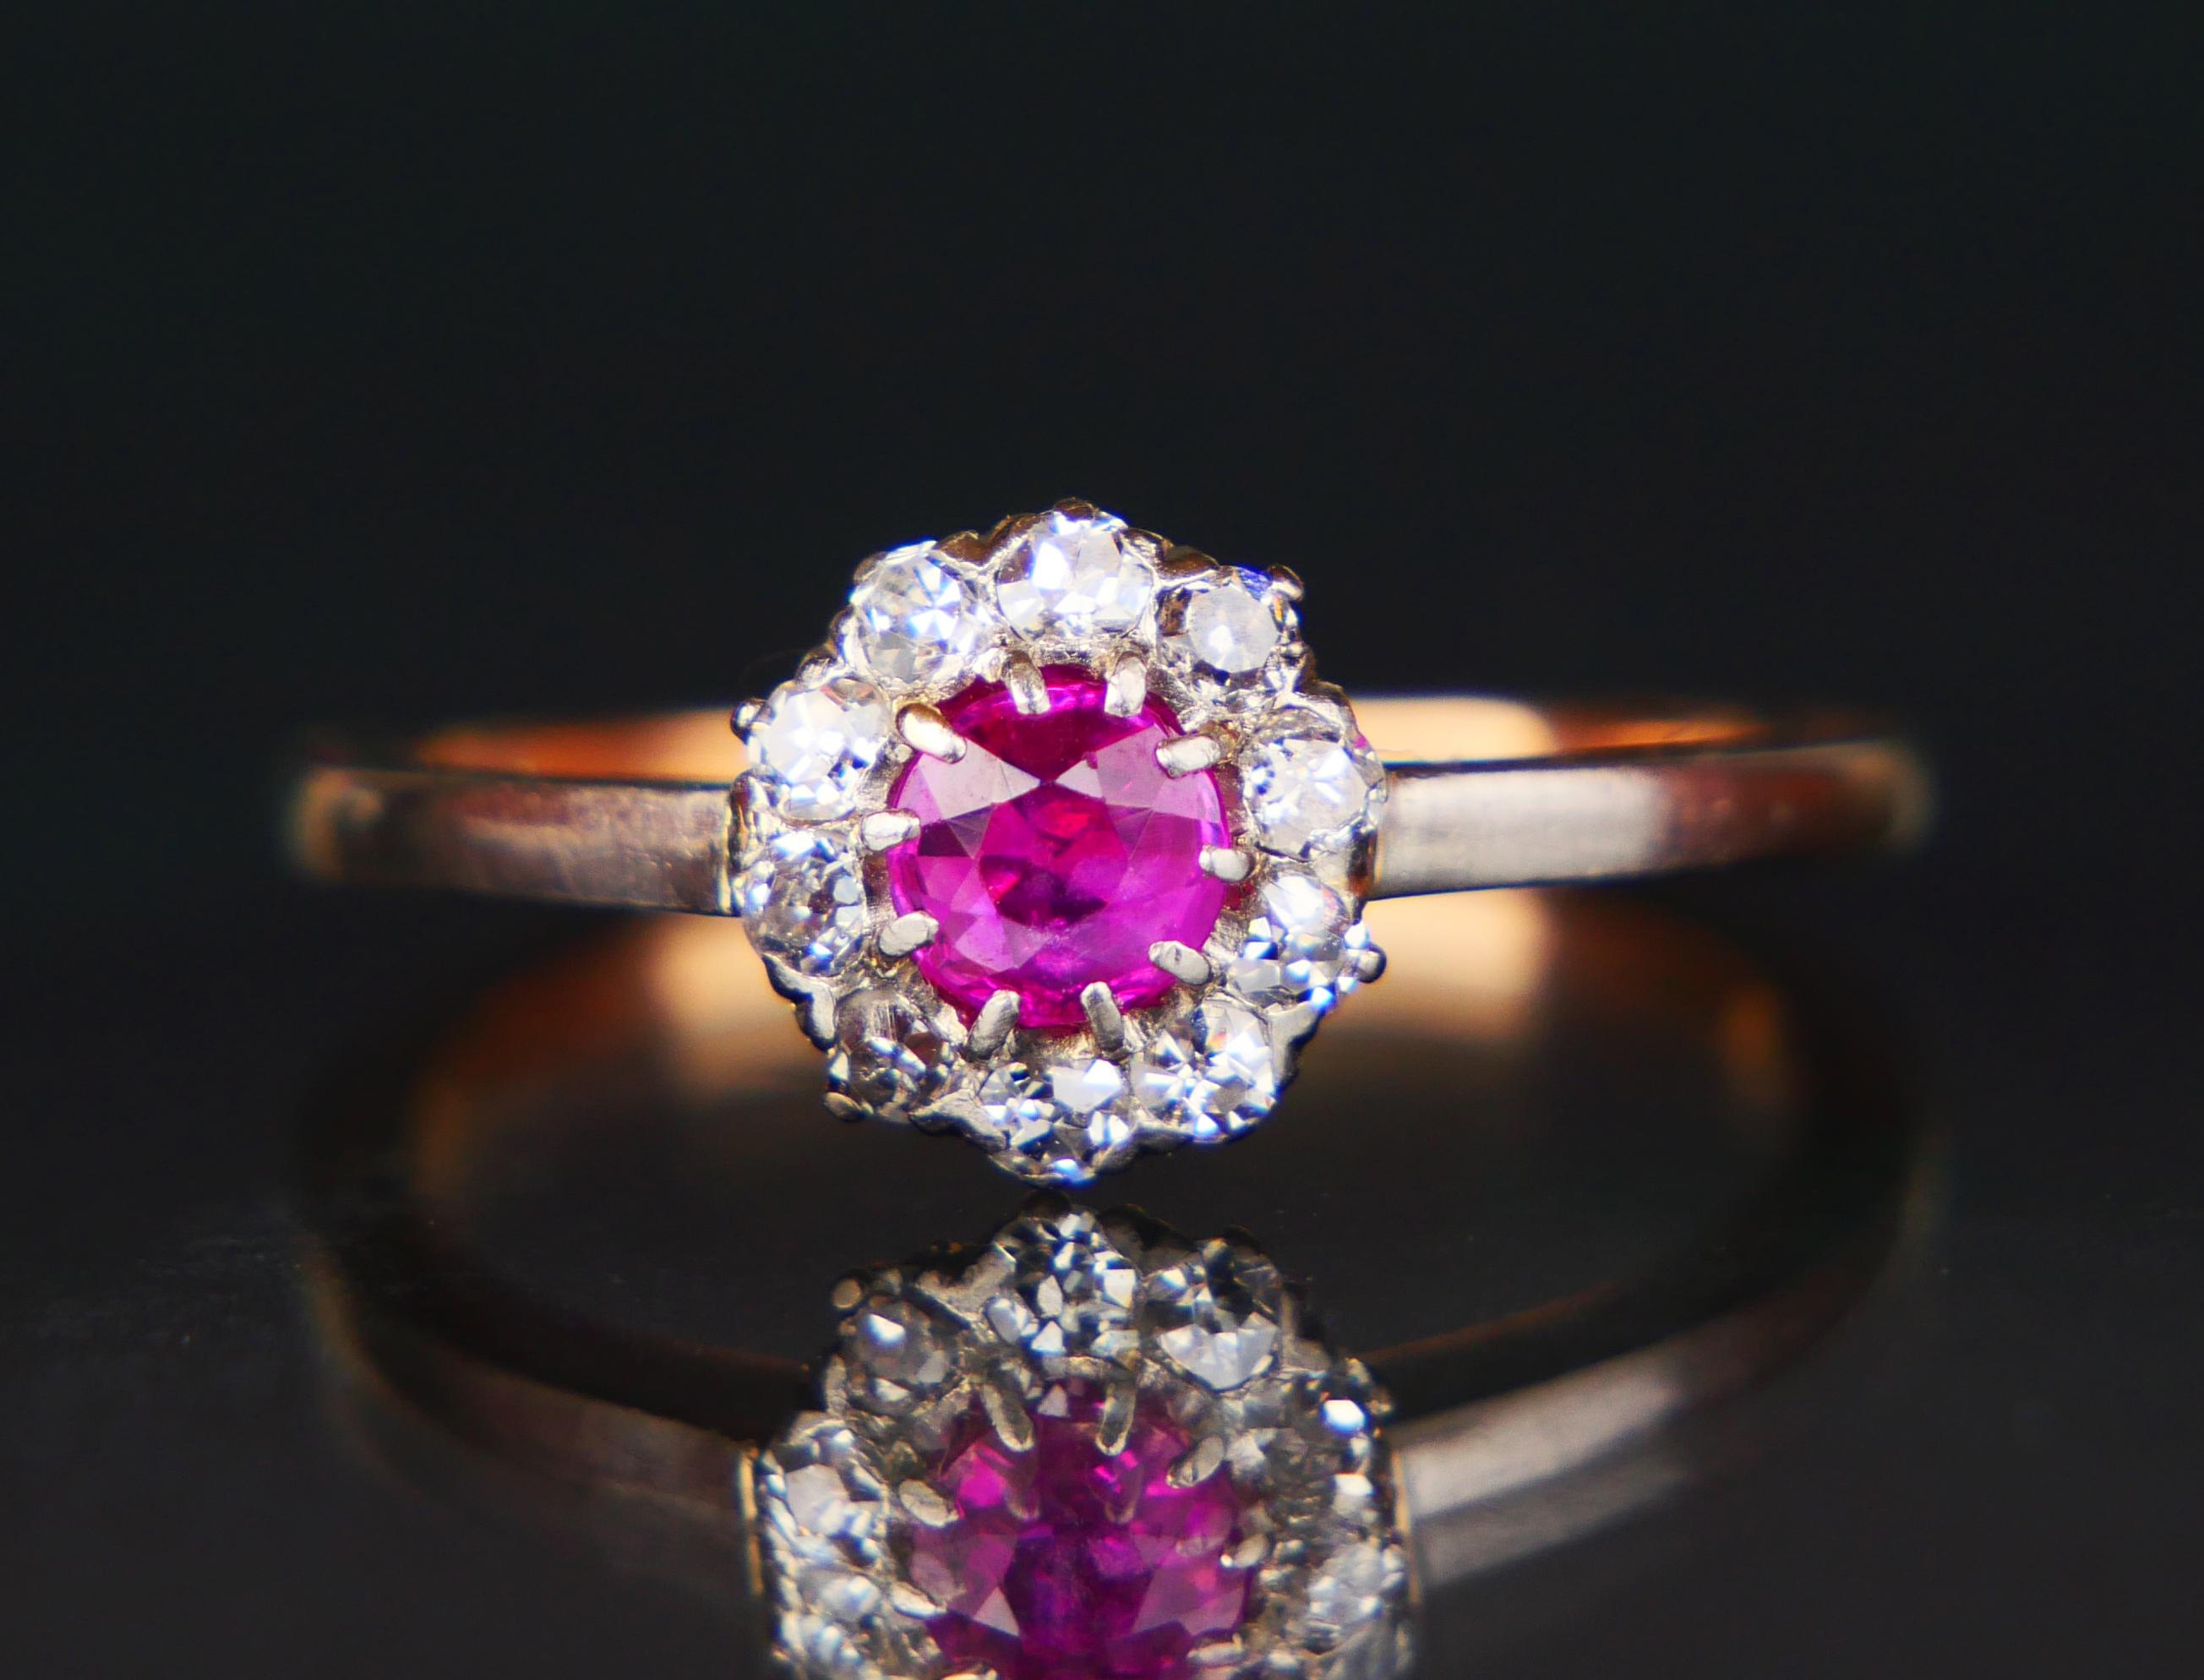 Beautiful 99 years old Swedish Halo Ring with parts in solid 18K Yellow Gold and Platinum.

Claw set Natural Ruby of old European diamond cut :  Ø 4.5 mm x 2.75 mm deep / ca. 0.5 ct , color is medium Rose Red , demonstrates internal structures